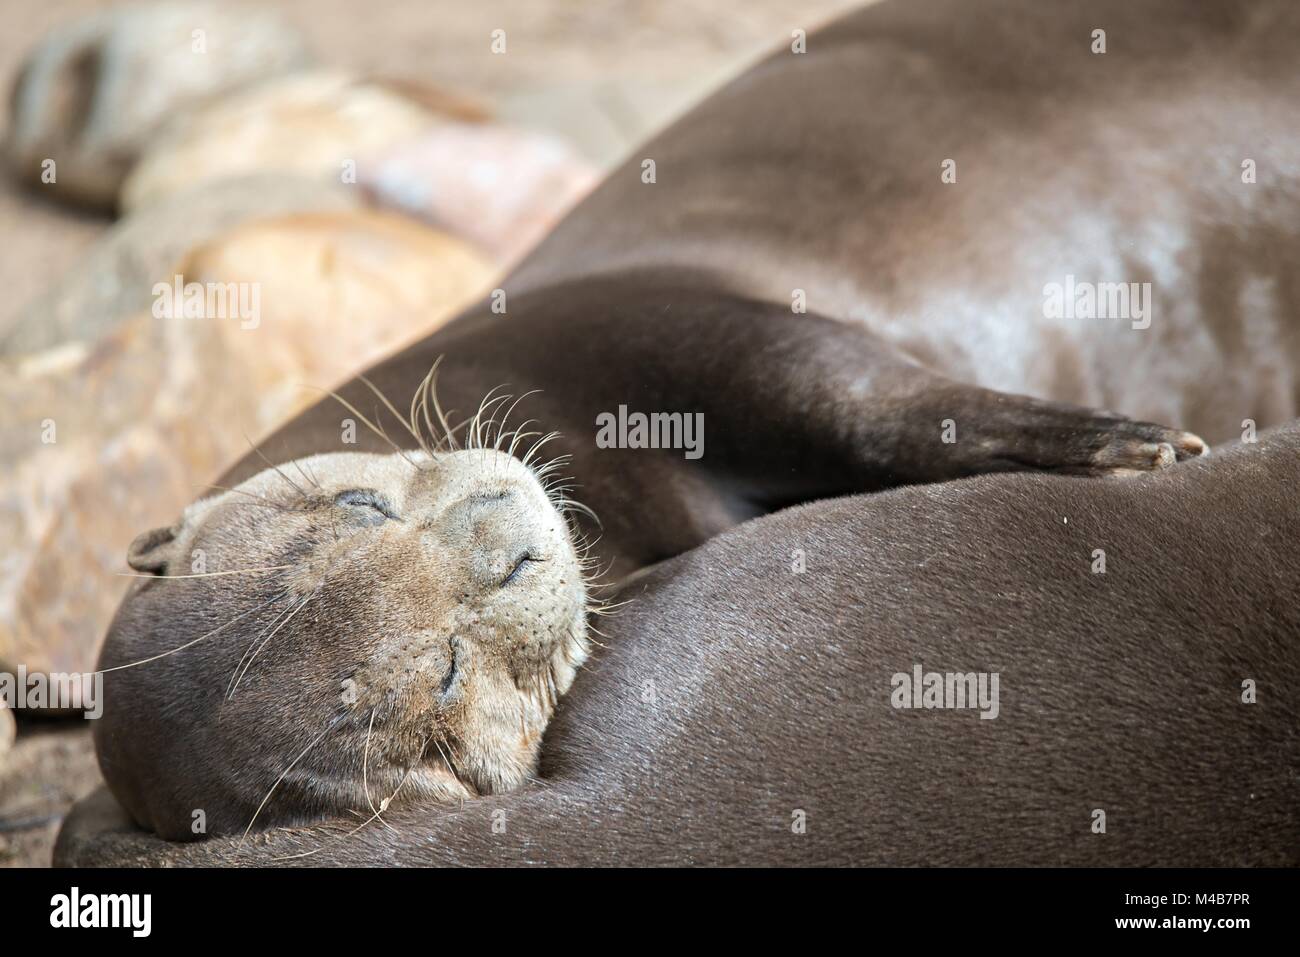 A pair of Oriental Short-Clawed Otters cuddling Stock Photo